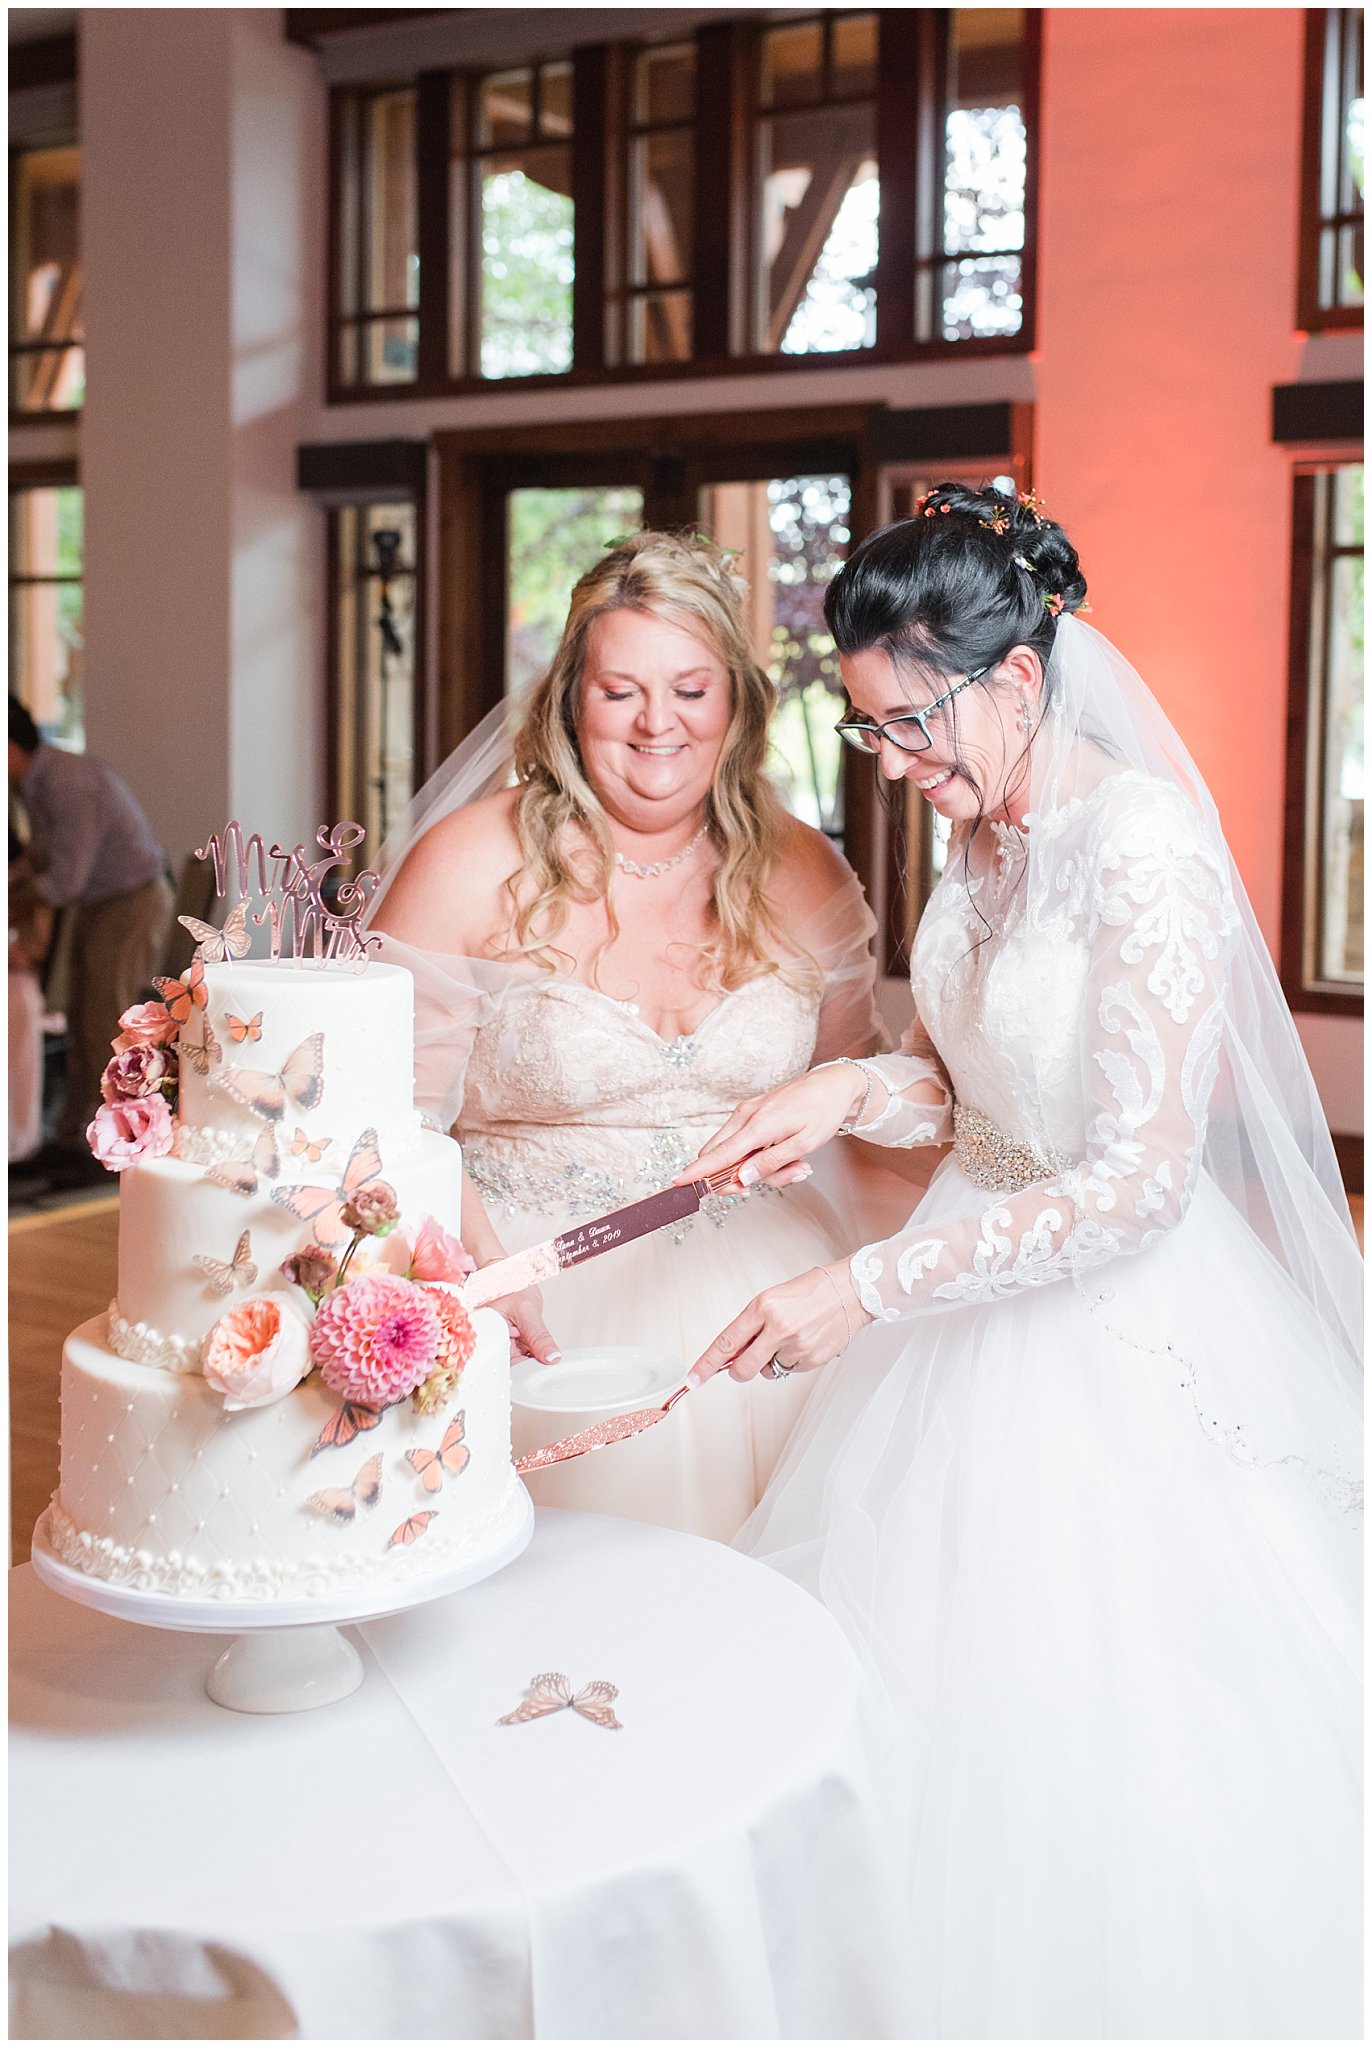 White wedding cake with butterflies and sunset colors of pink and orange | Park City Wedding at the Hyatt Centric | Jessie and Dallin Photography